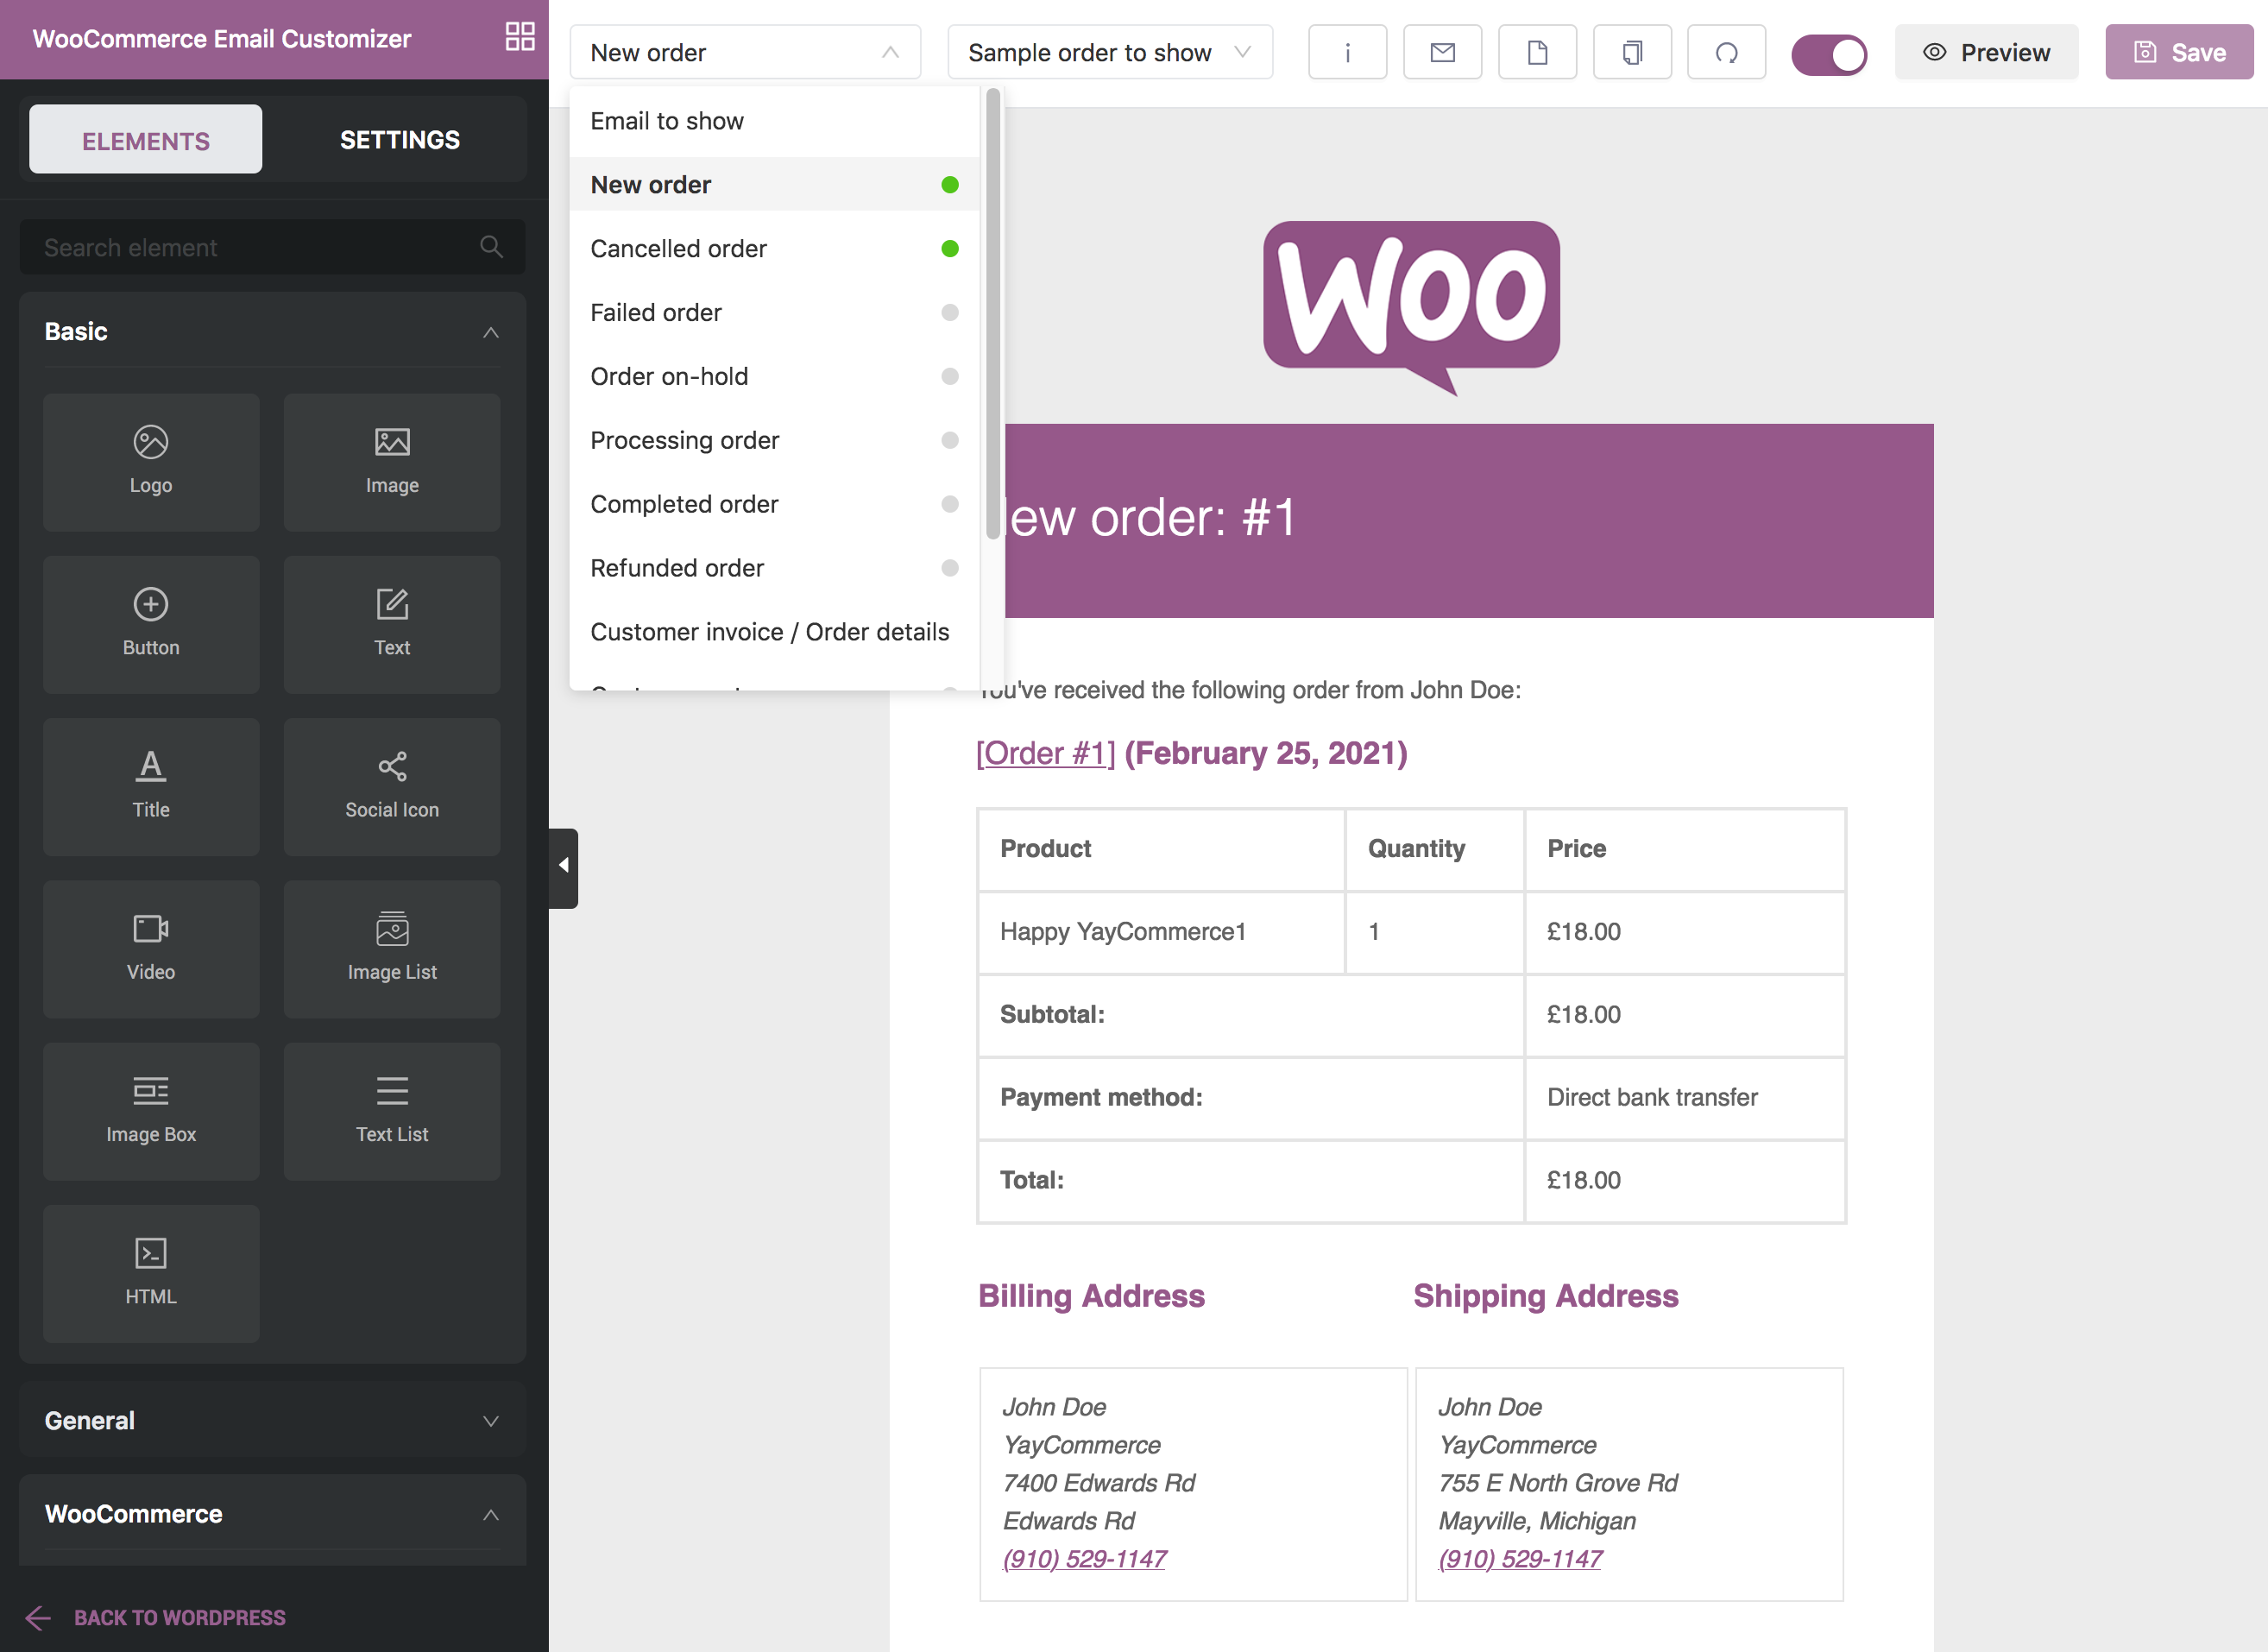 Choose a WooCommerce email template to start customizing